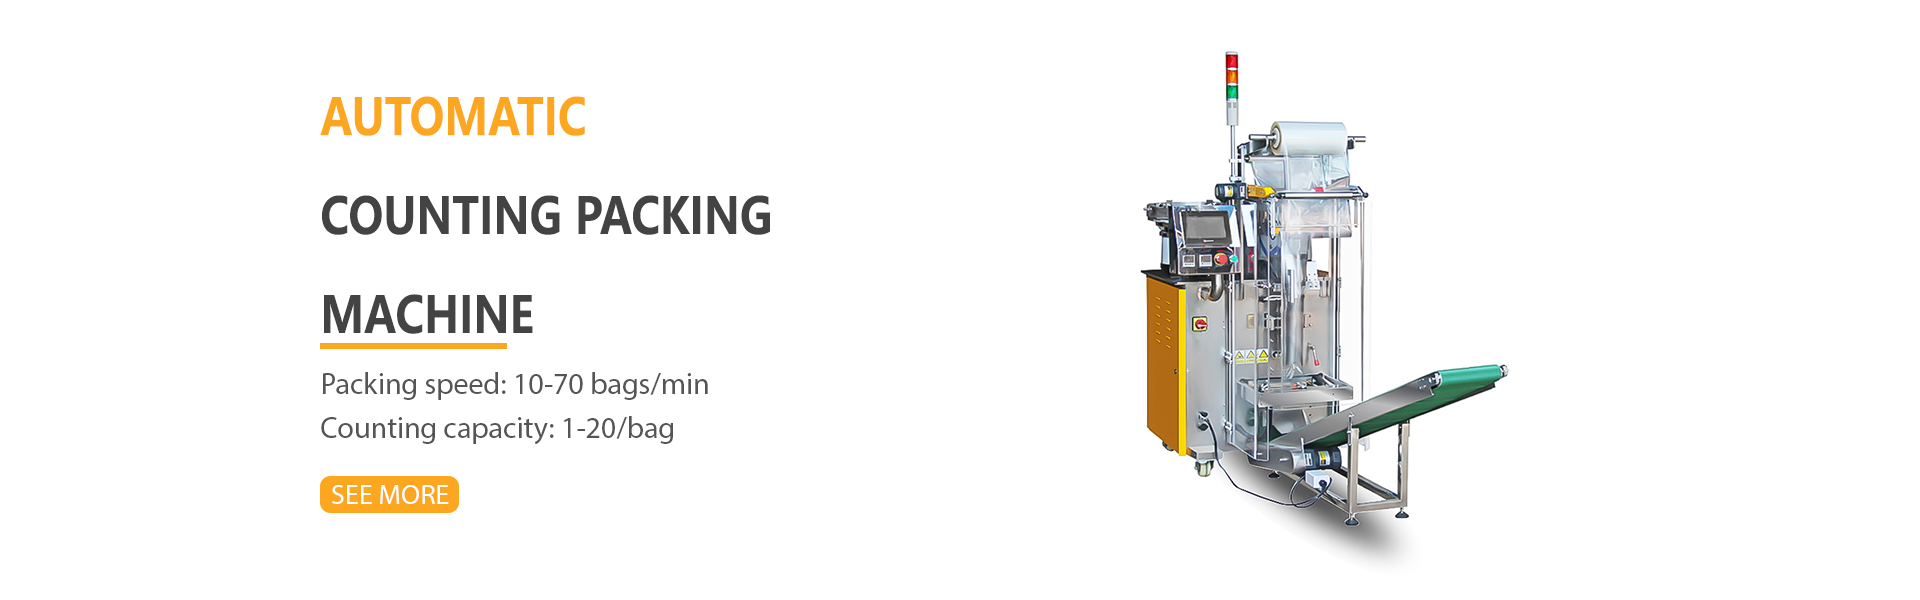 Automatic counting packaging machine